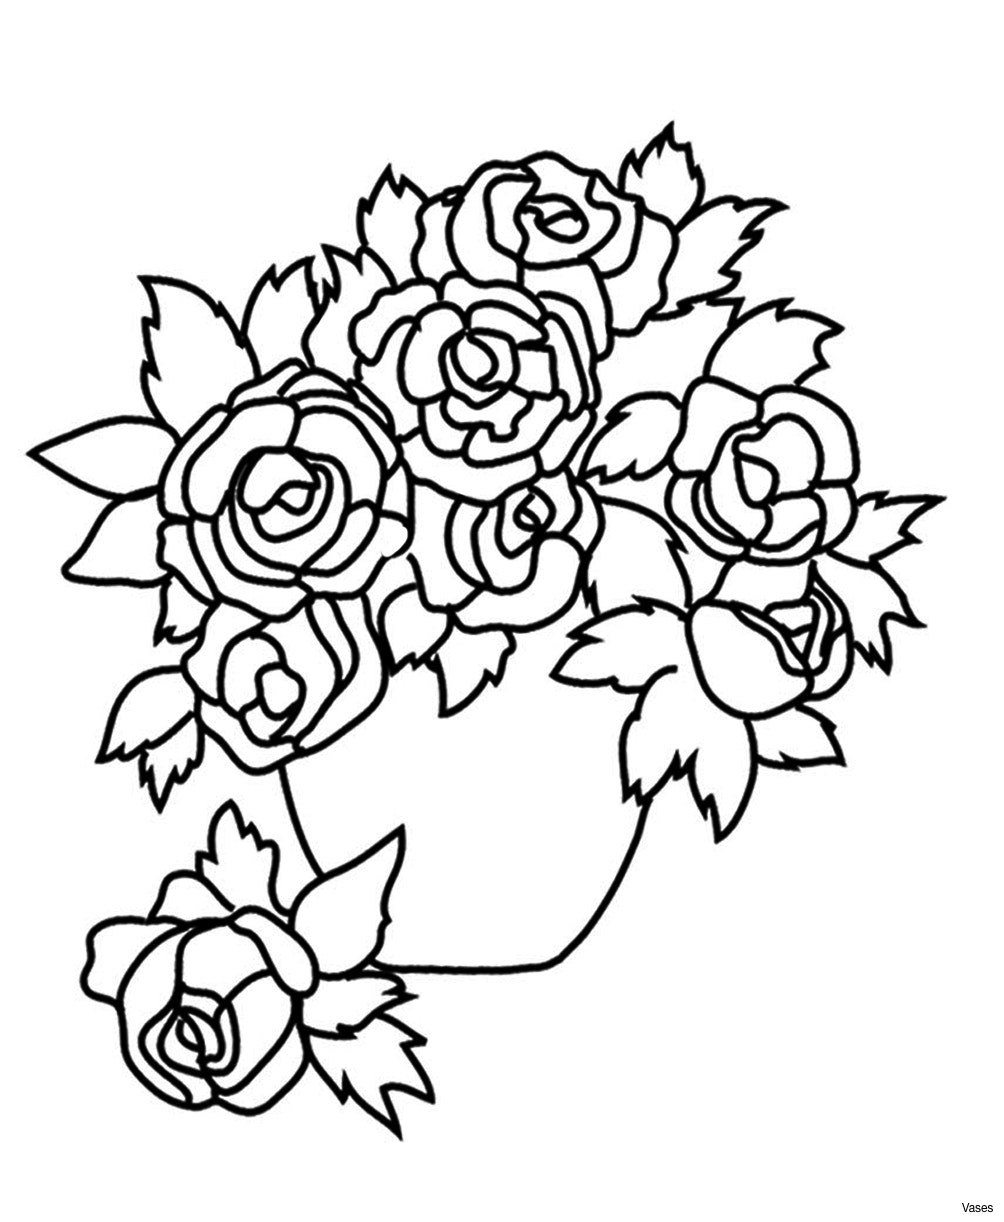 huge flower vase of new fresh s s media cache ak0 pinimg originals 0d b4 2c free fun time with free easy coloring pages printable pencil sketch flower vase easy drawn drawing and in color